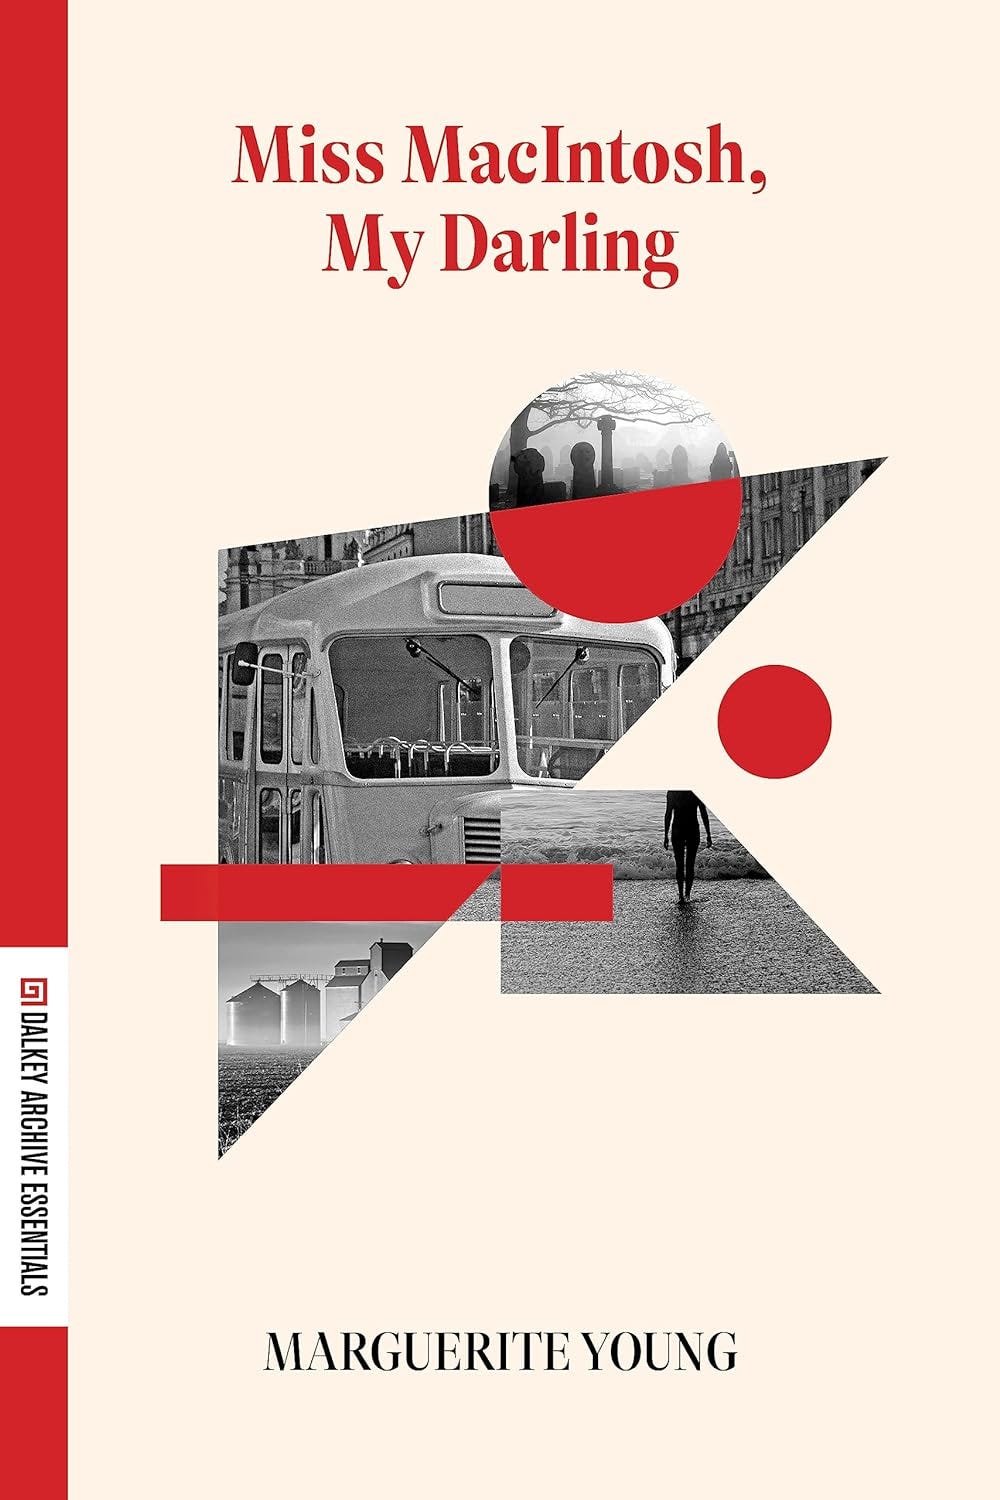 The cover of Miss MacIntosh, My Darling by Marguerite Young.  The cover art includes geometric cutouts of black and white photographs, one of a foggy cemetary, one of a bus, one of a person's feet standing in a shallow surf.